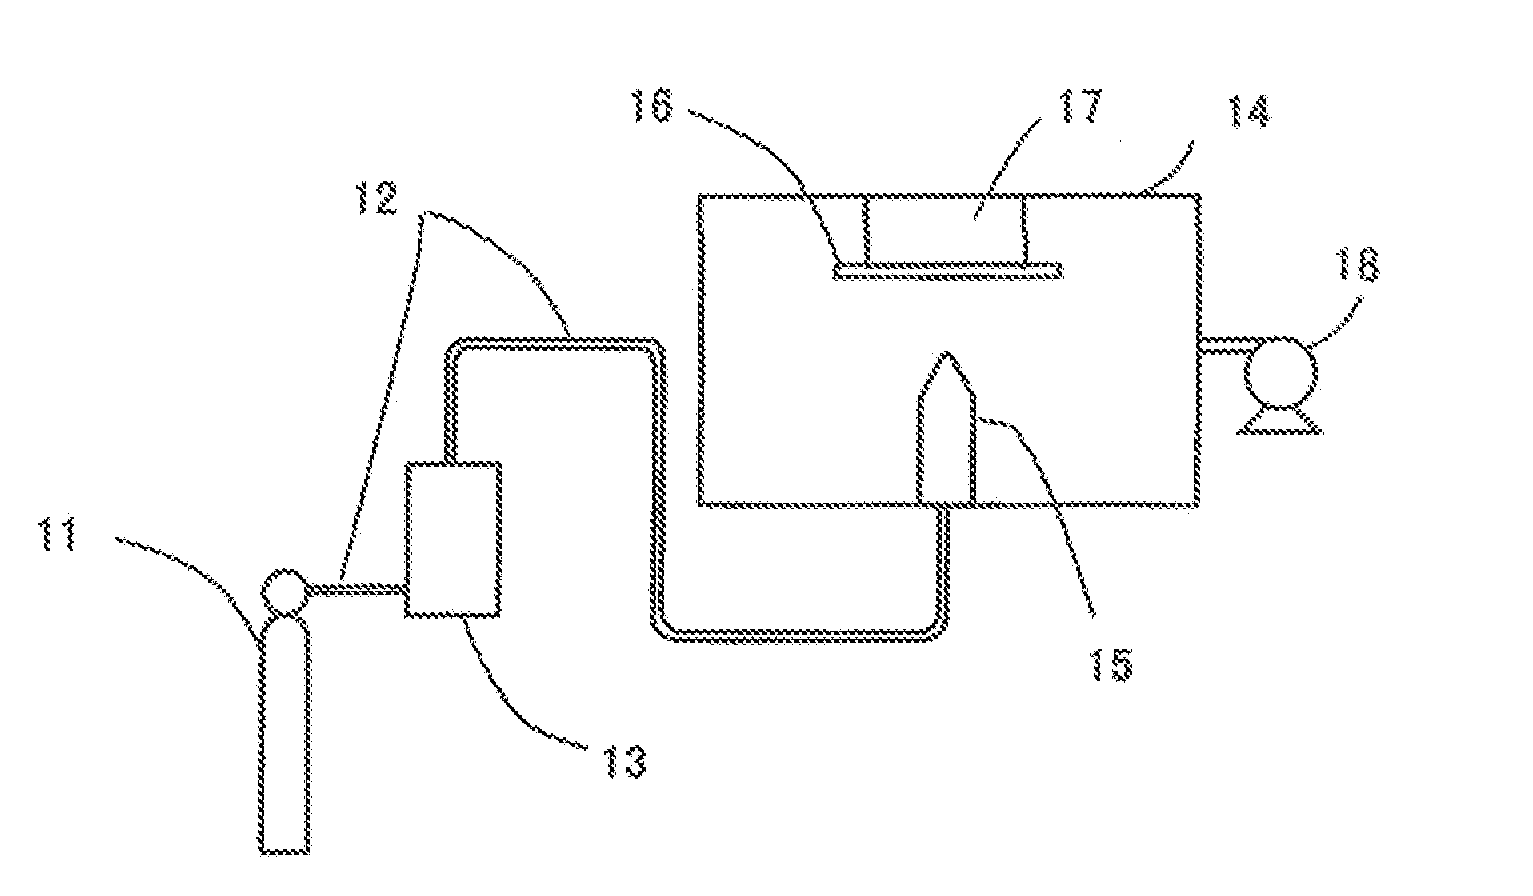 Brittle material fine particles with internal strain for use in aerosol deposition method